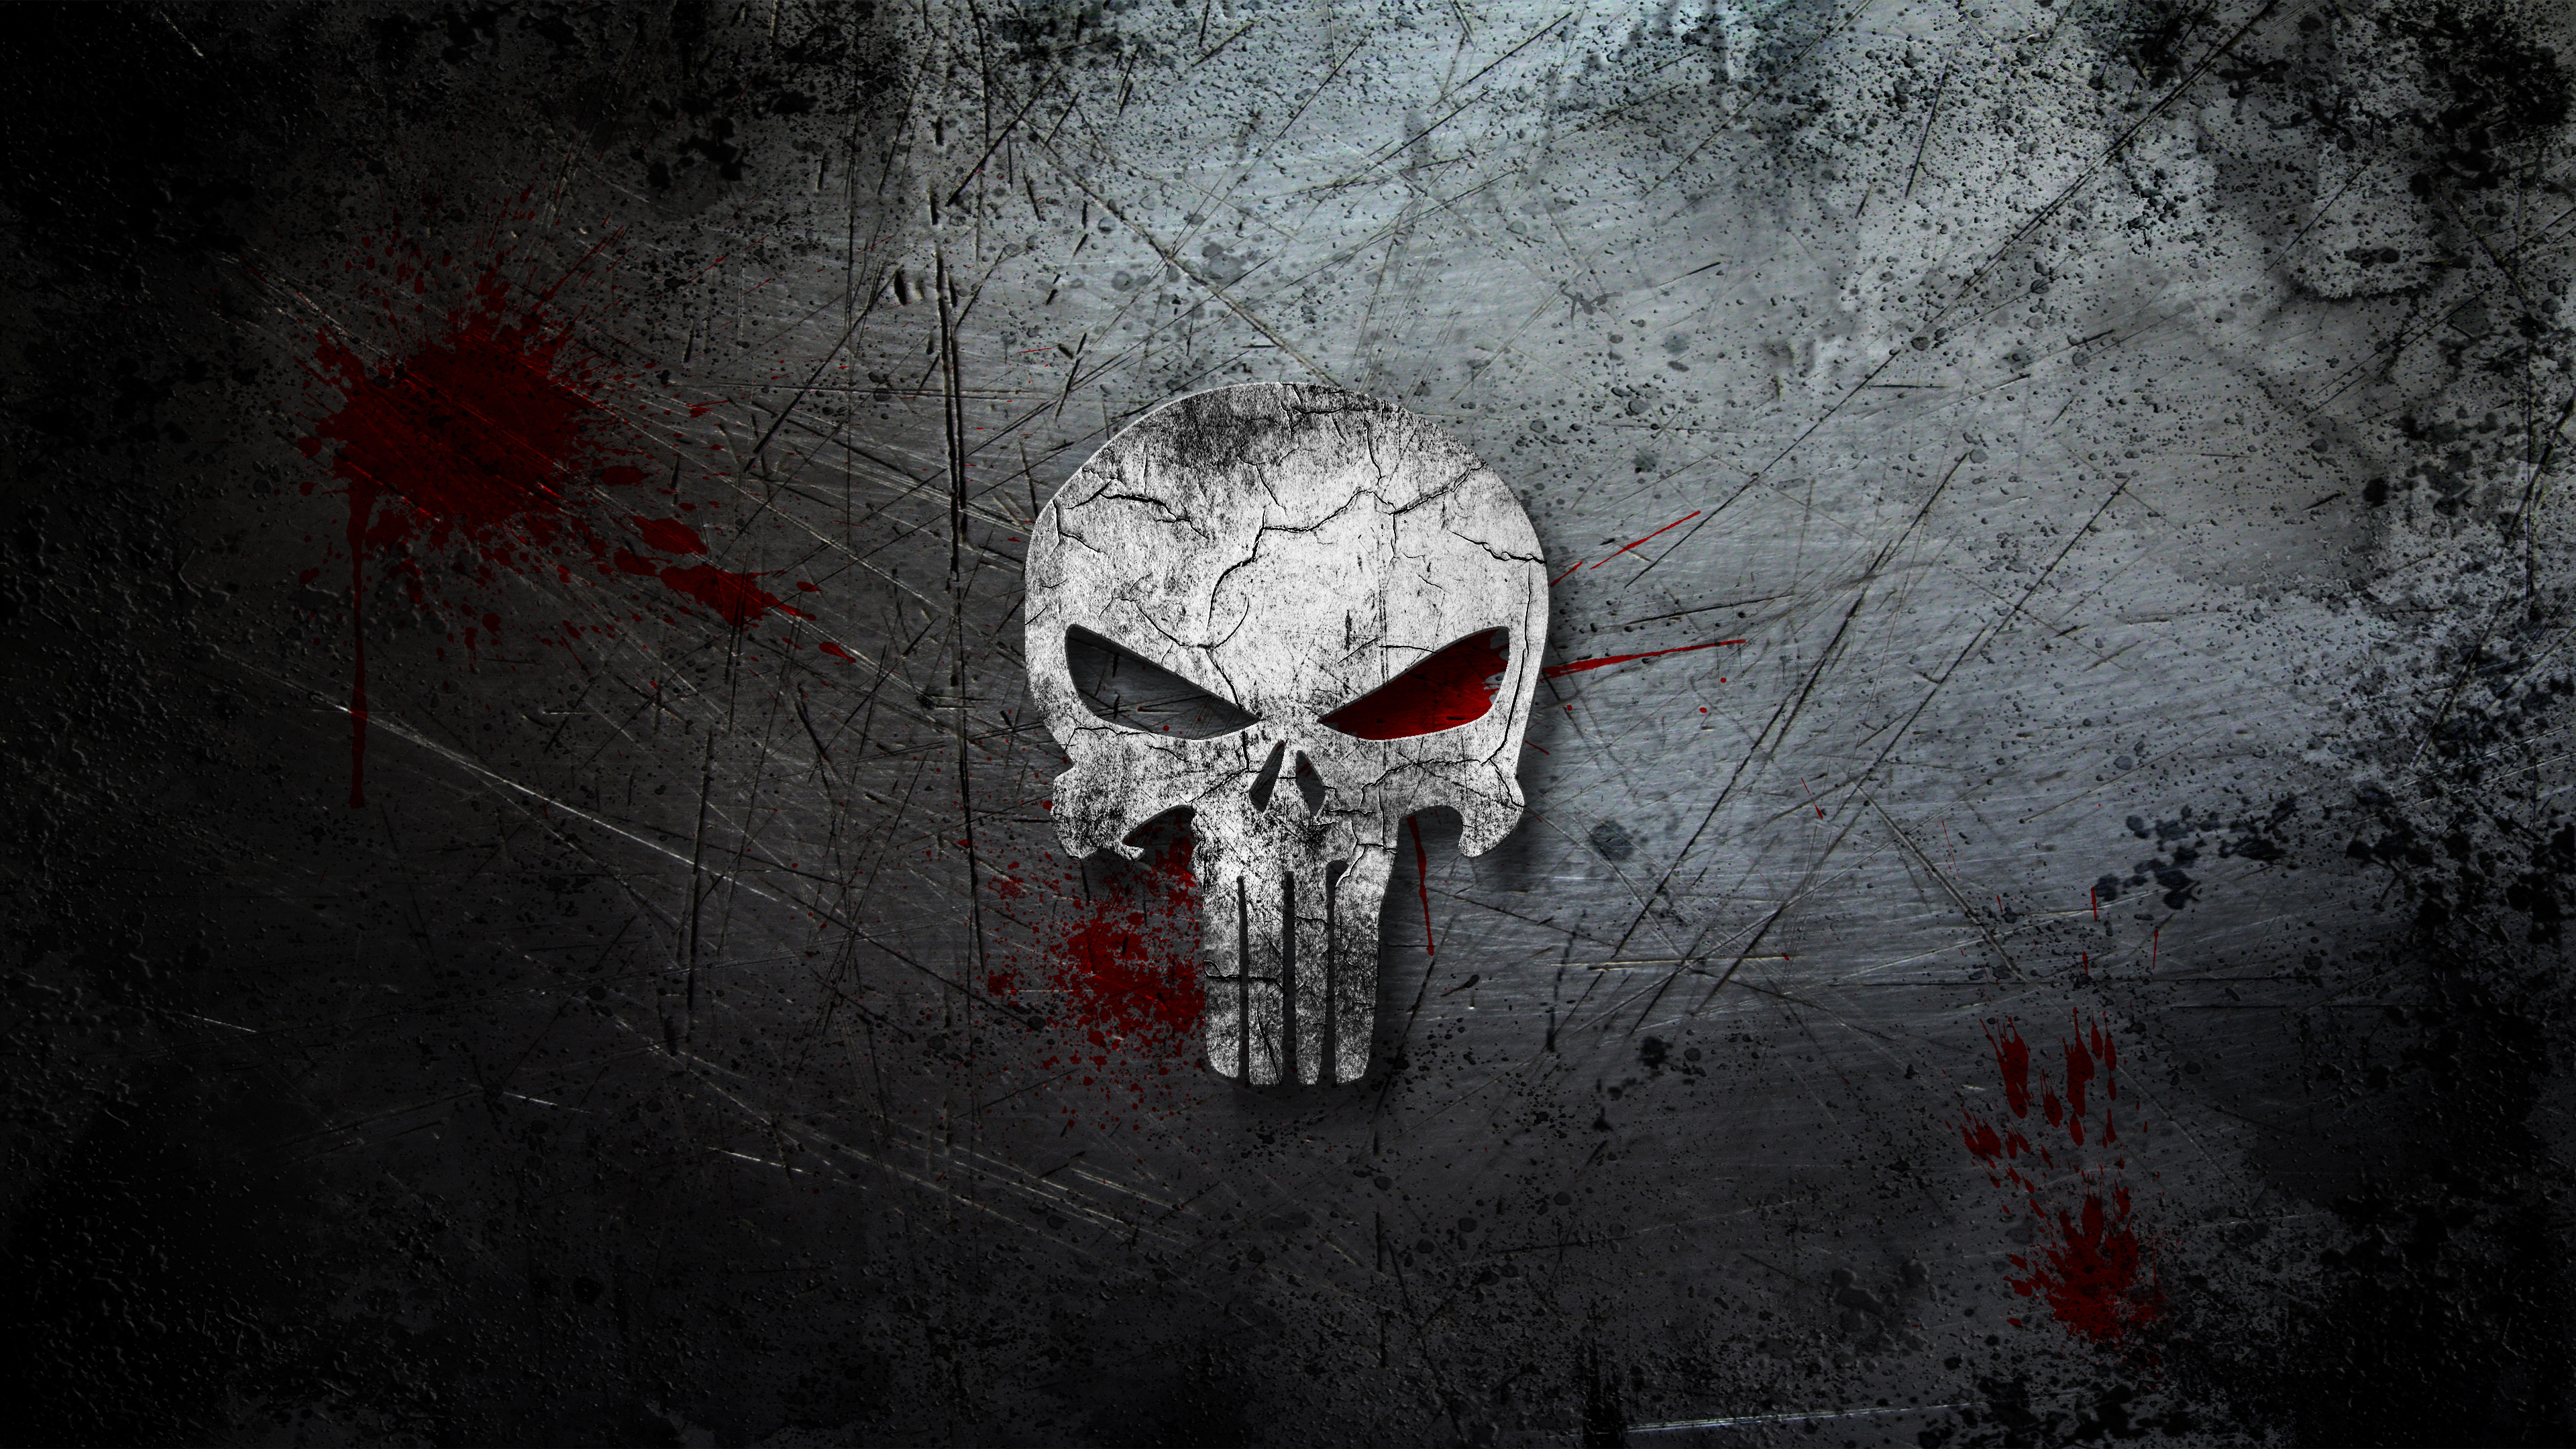 Punisher hd wallpapers